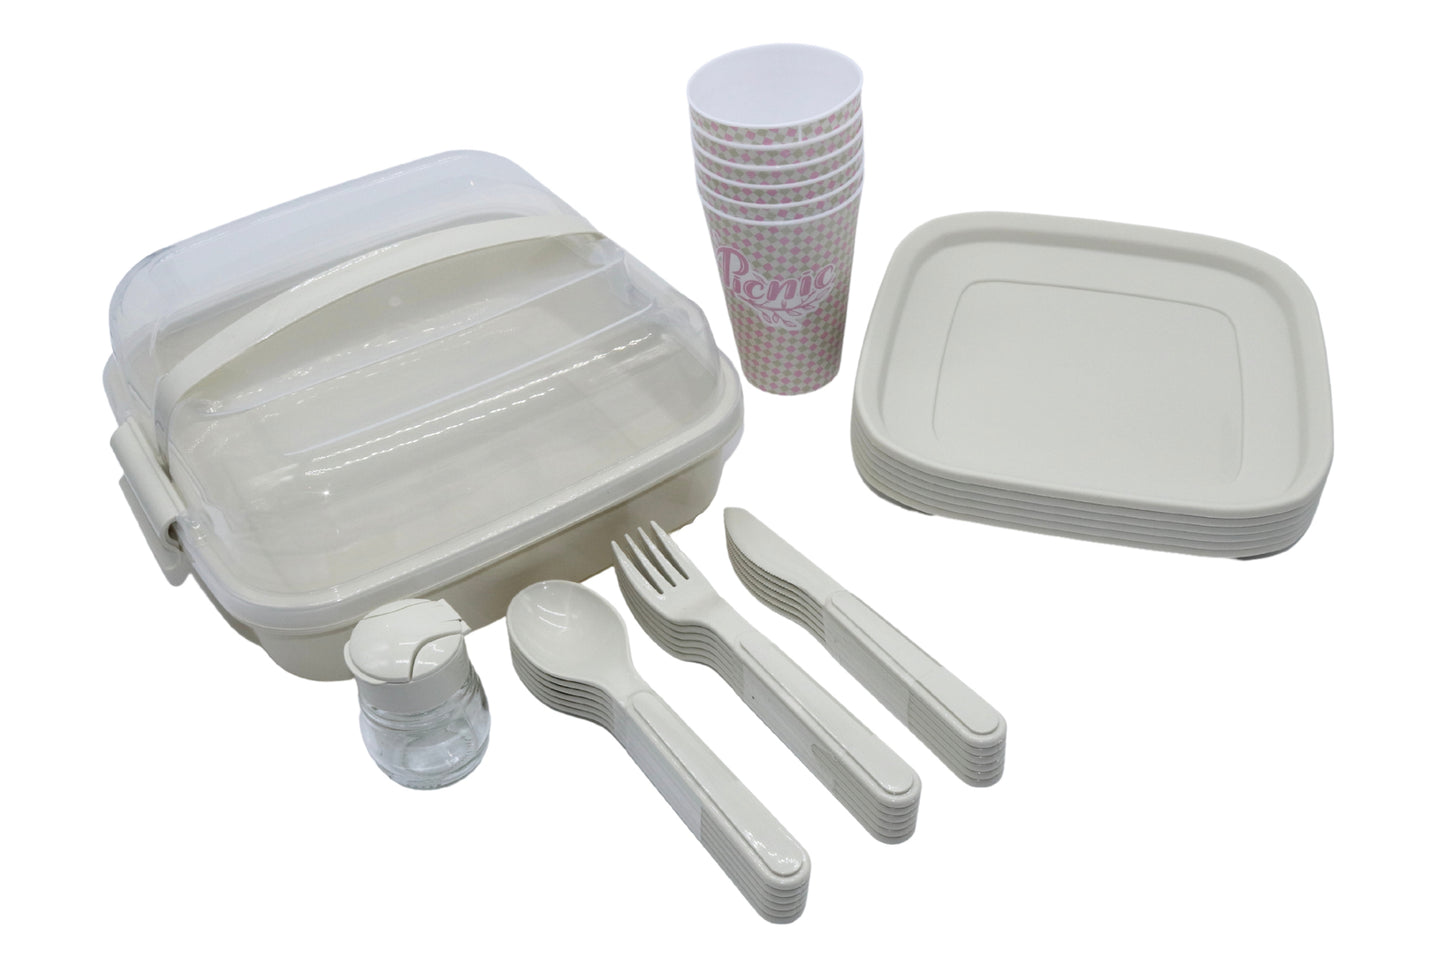 Camping utensils for dining 6 person